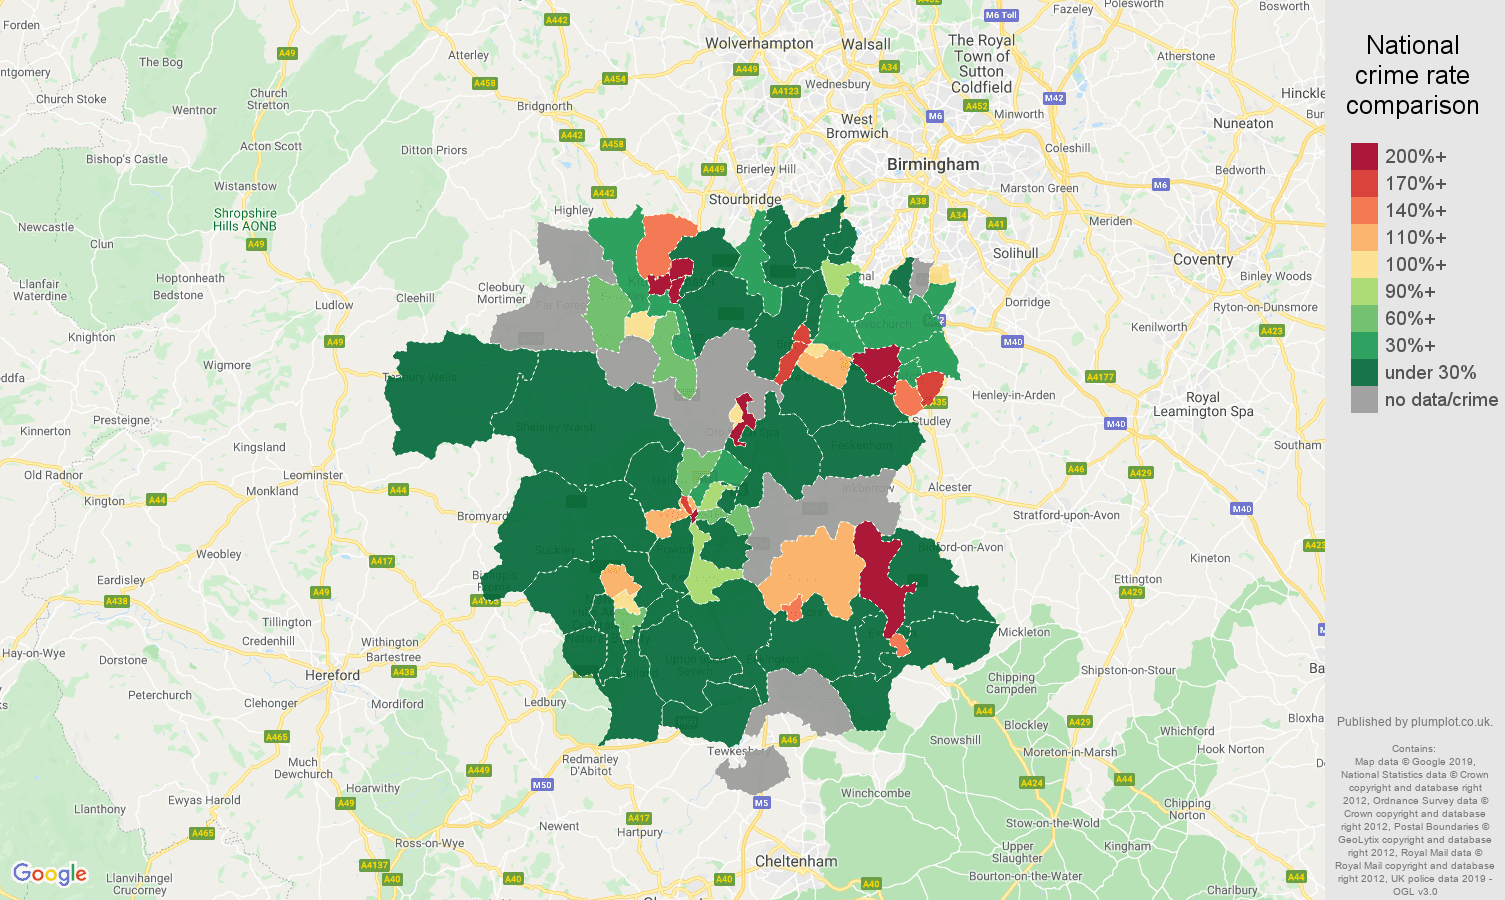 Worcestershire shoplifting crime rate comparison map